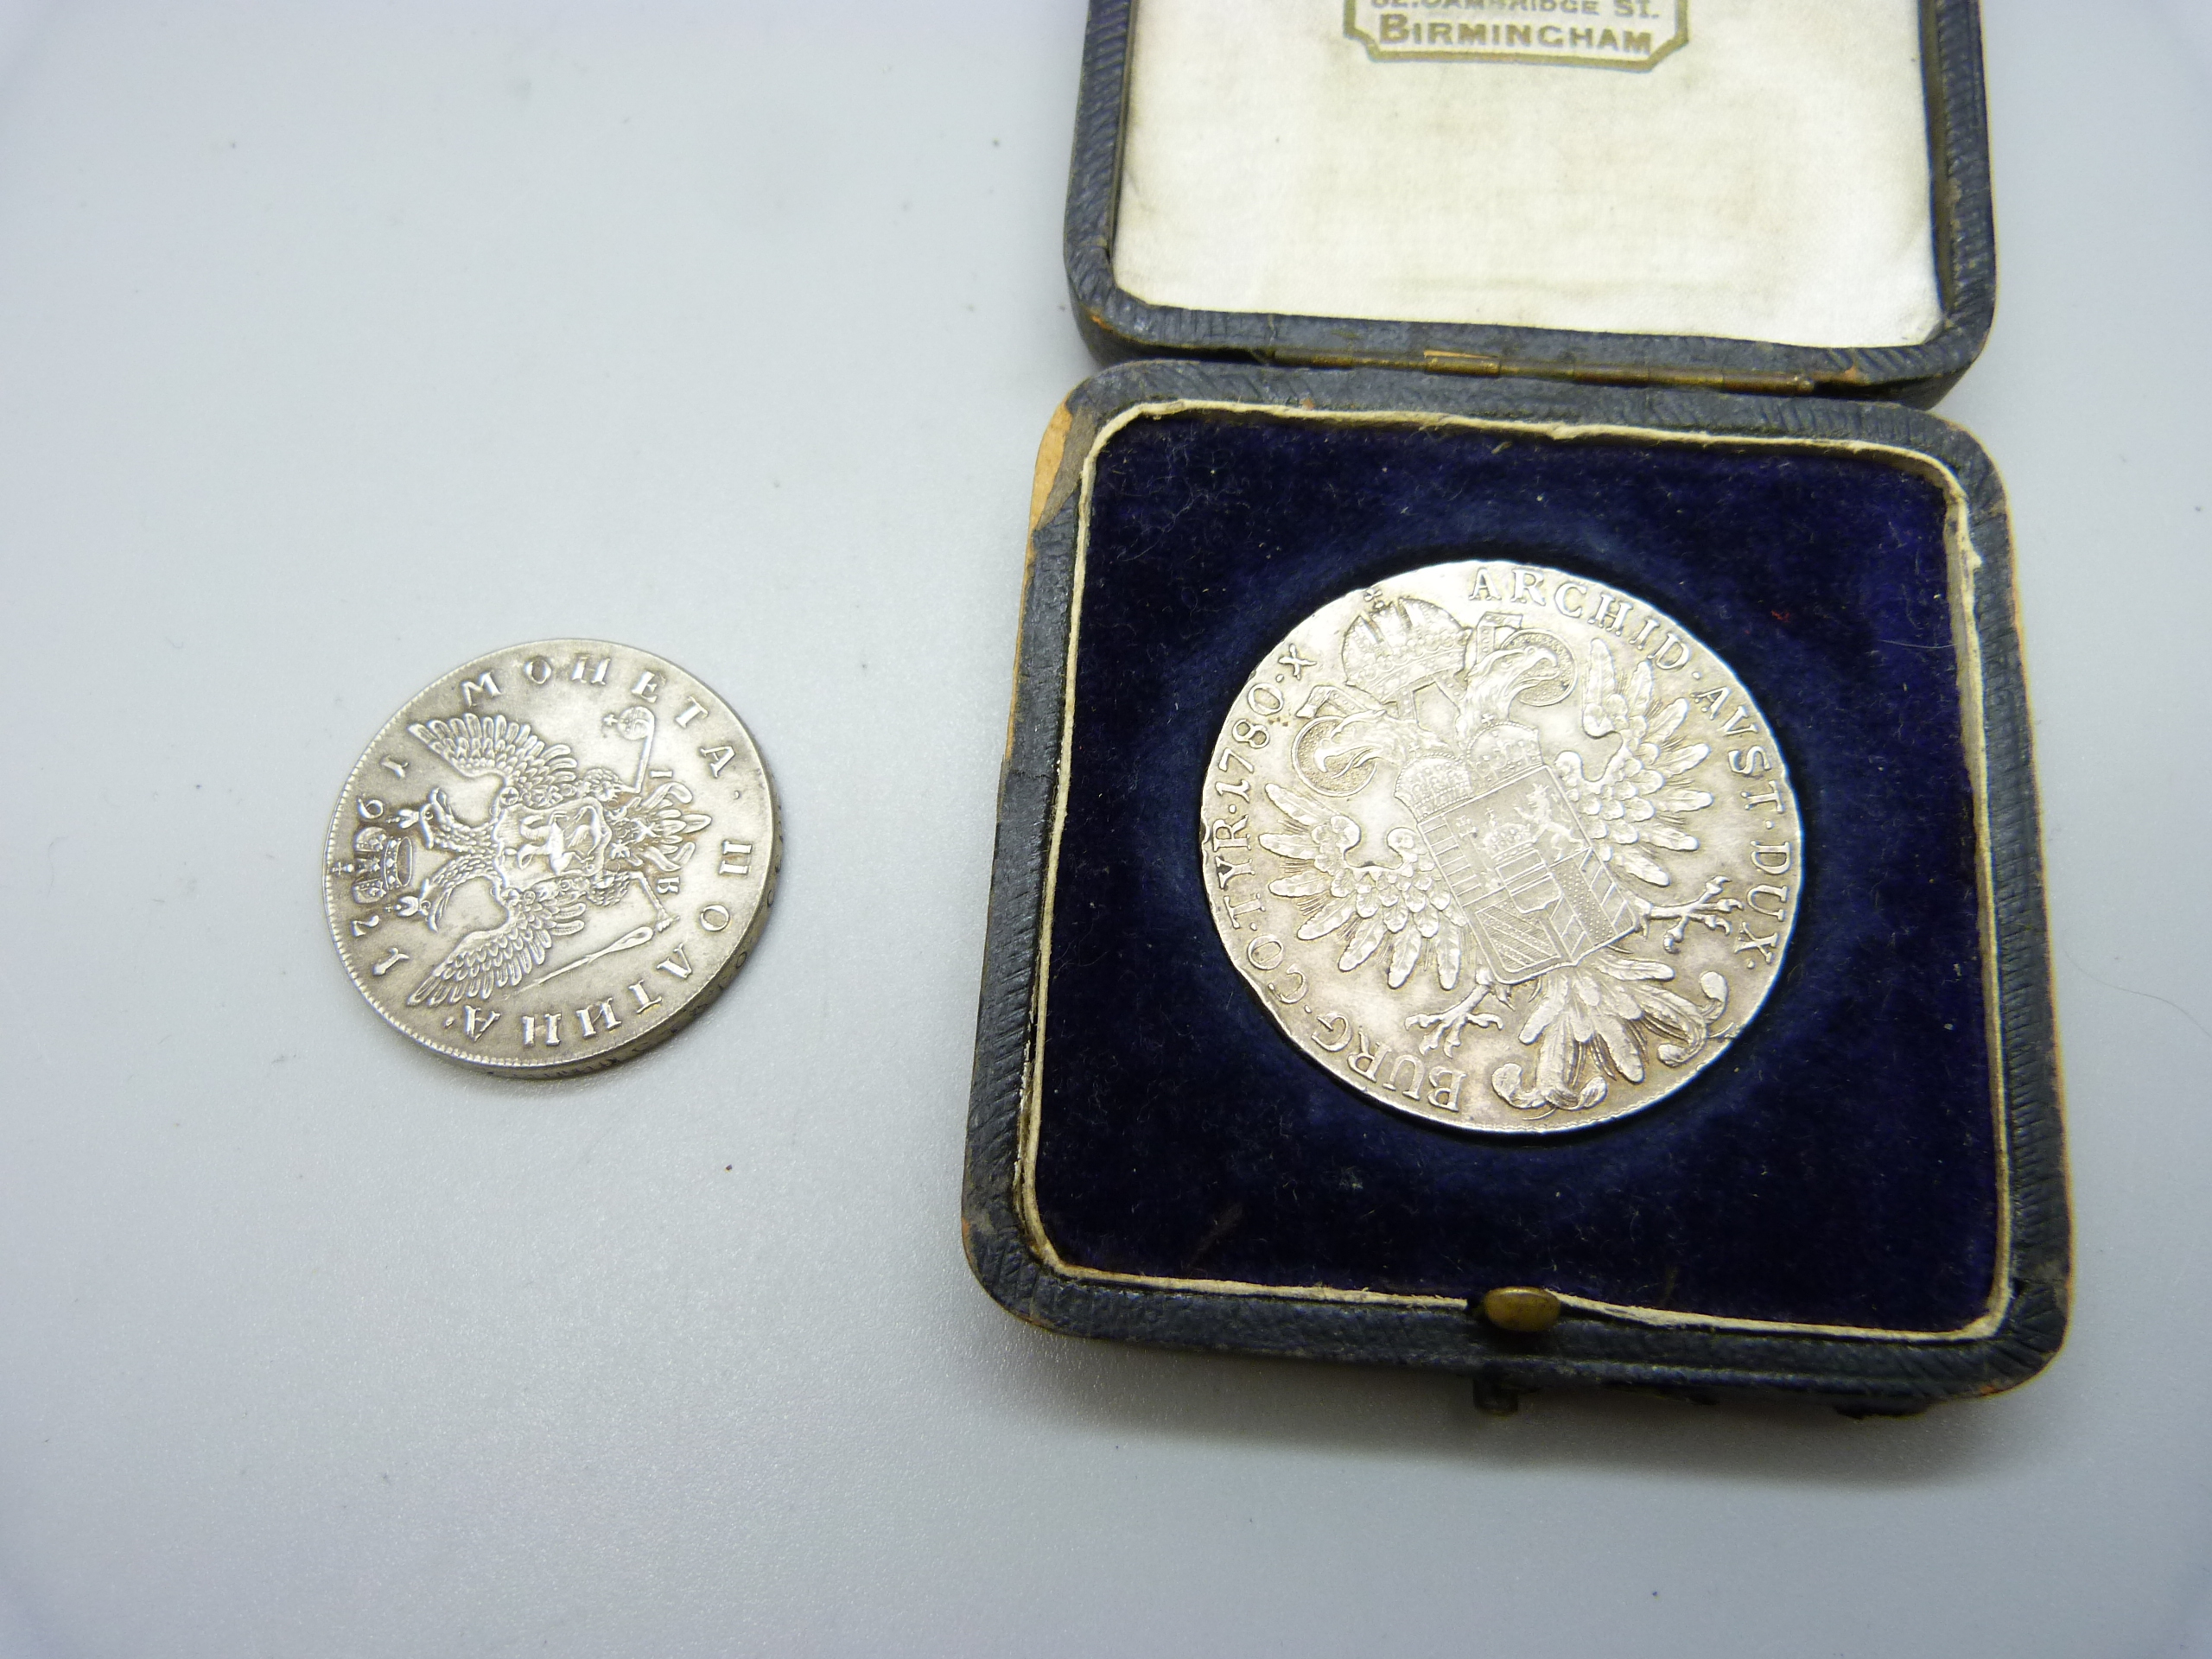 A Maria Theresia 1780 coin and a 1921 Austro-Hungarian coin - Image 2 of 2